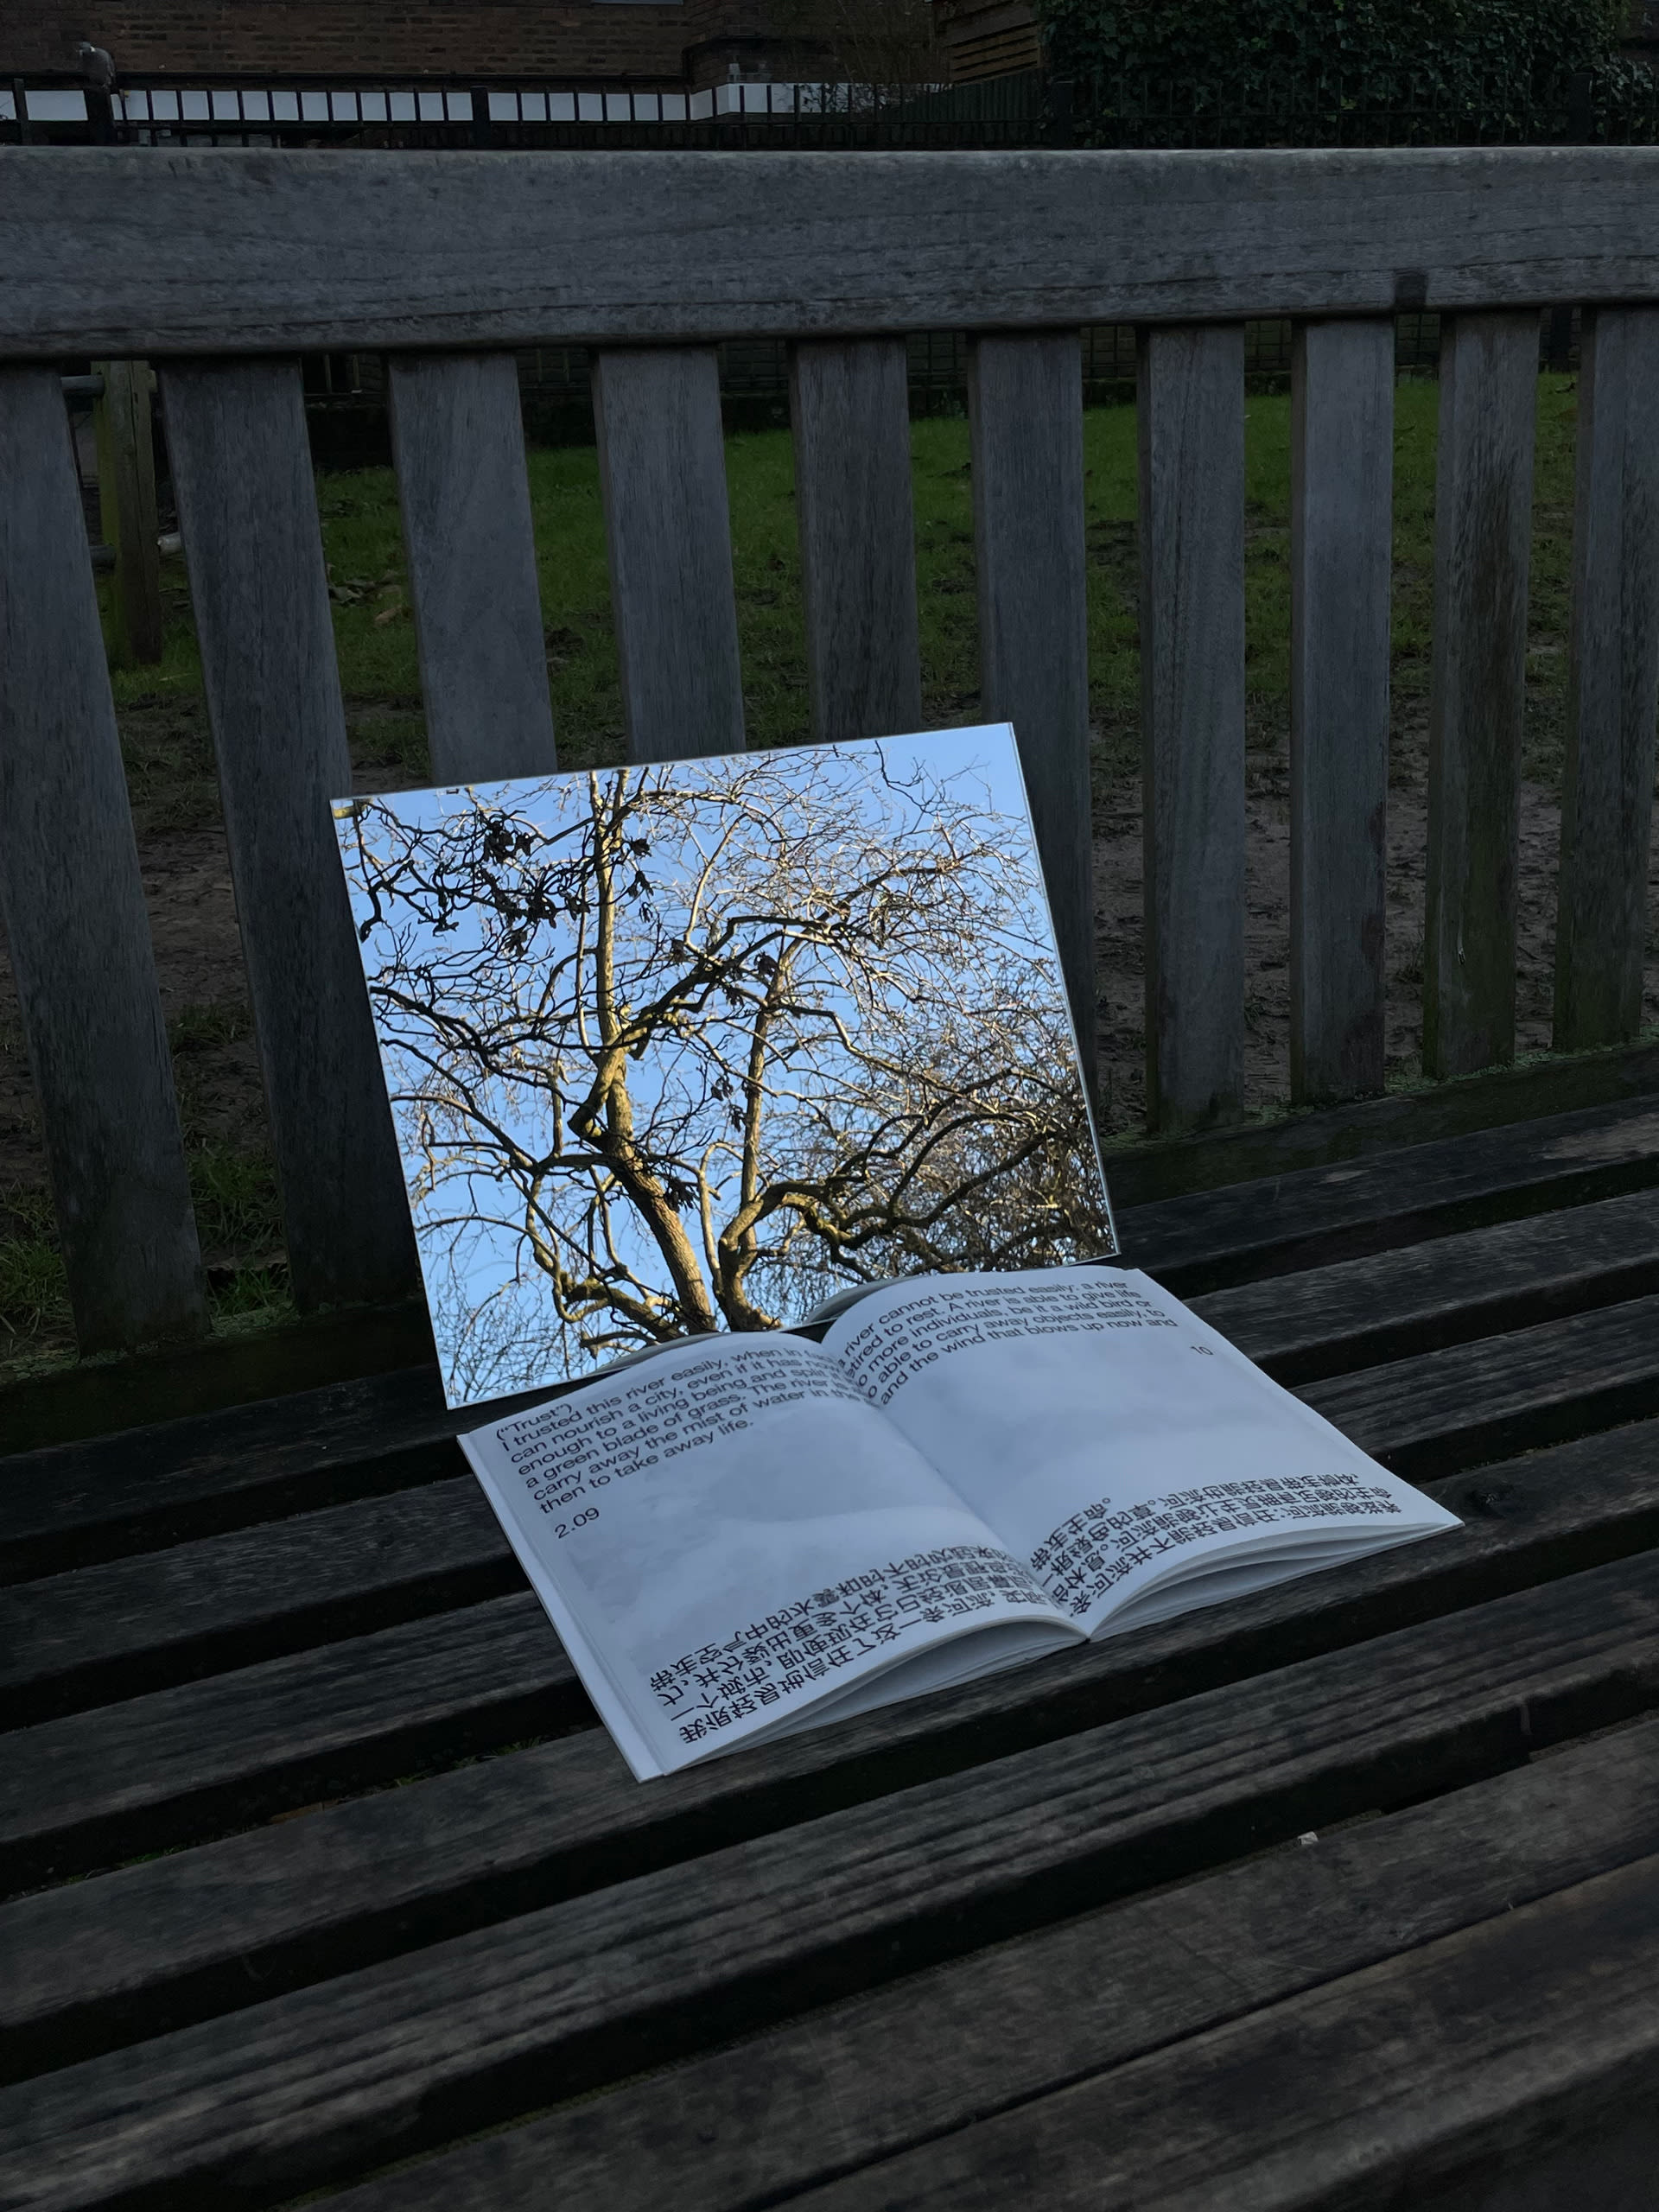 A photograph of a wooden bench at an angle, with a rectangular mirror leaning against the backrest, reflecting bare-branched trees. A book is laid open on the seat in front of the mirror.